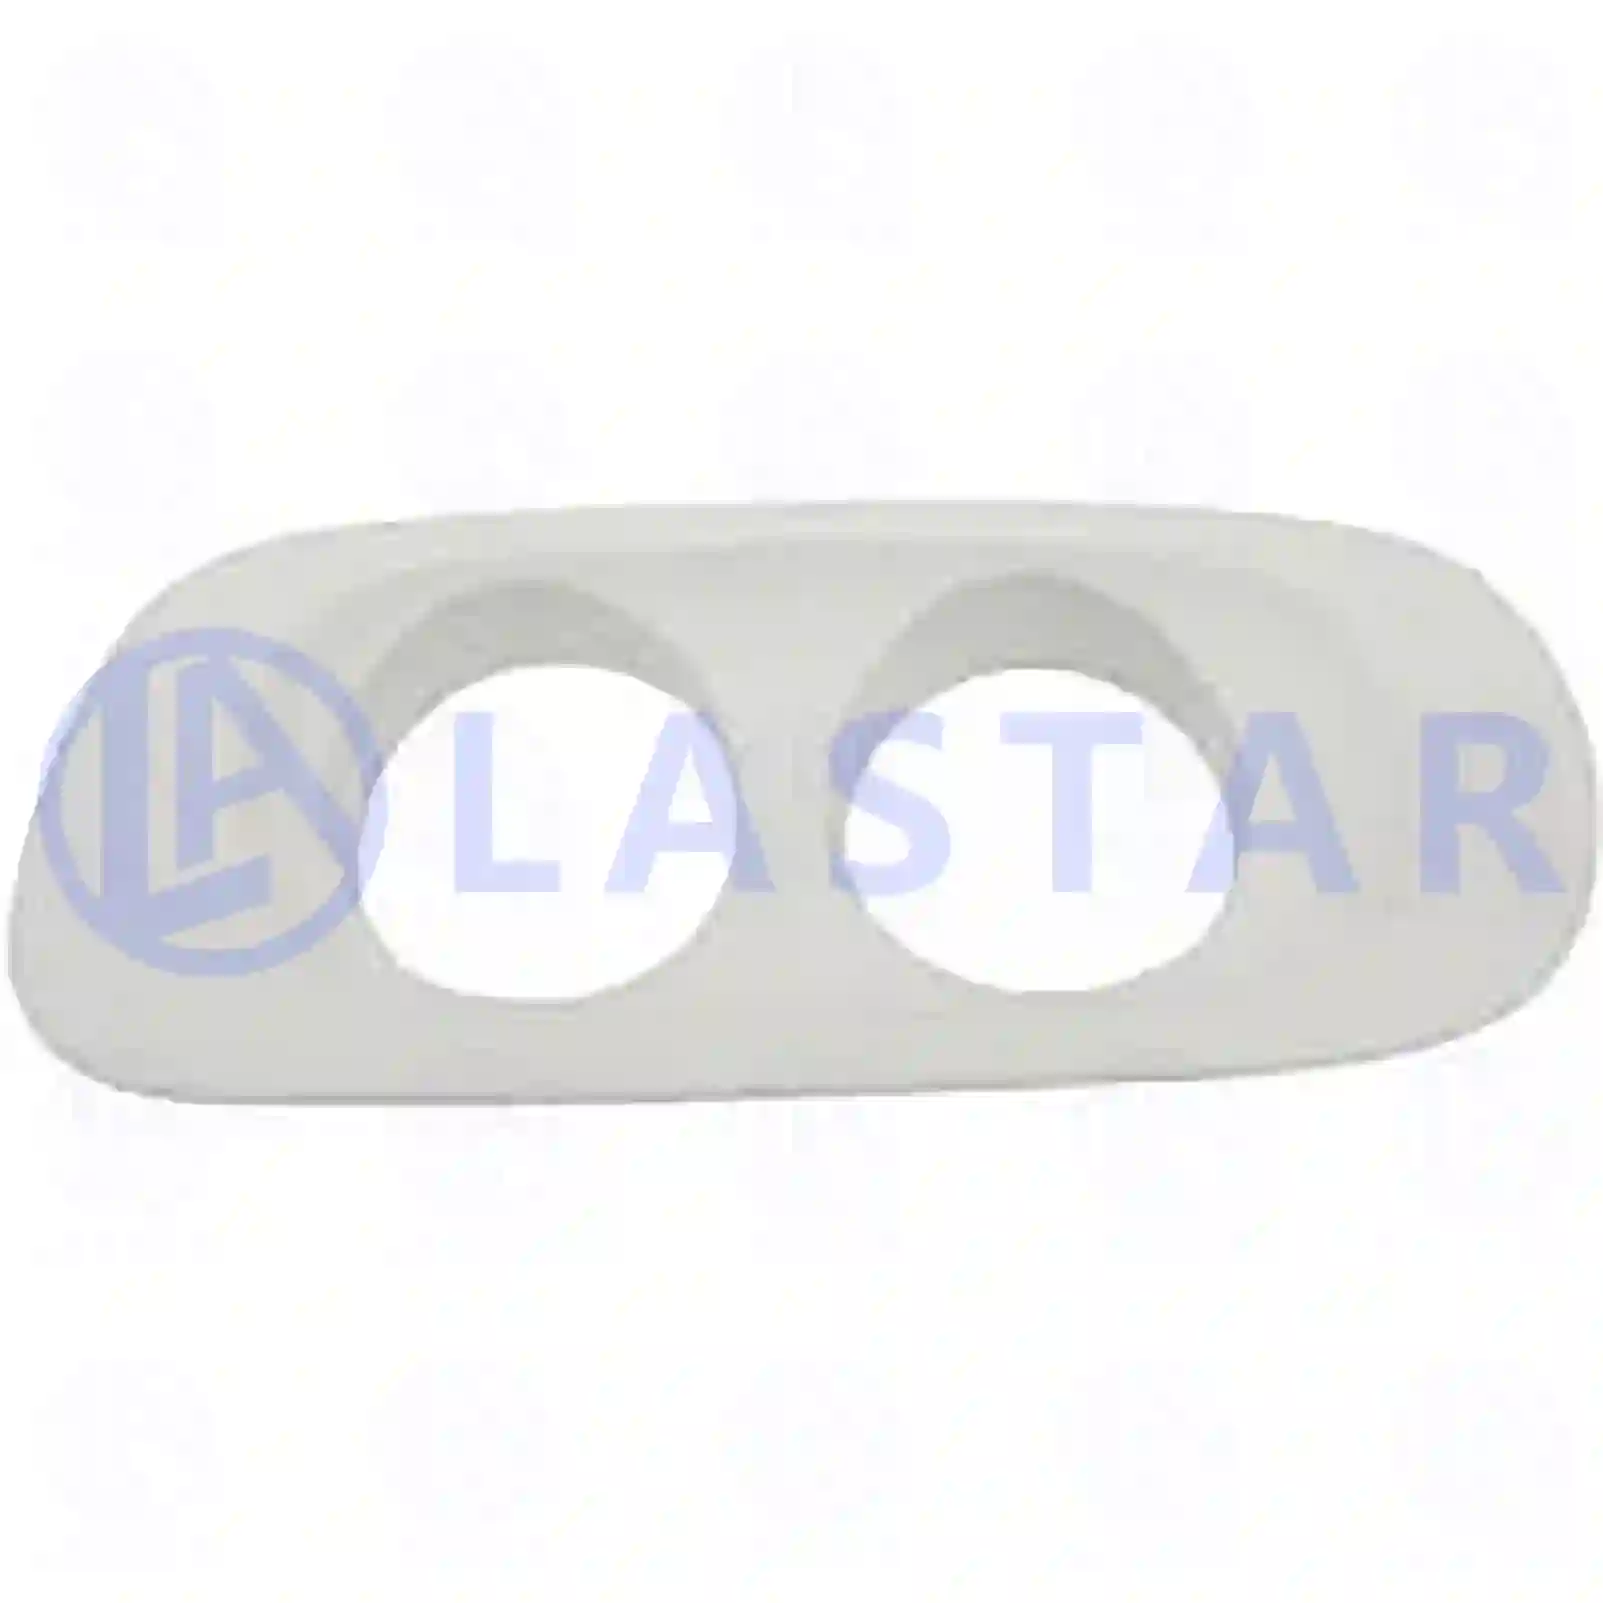 Bumper cover, auxiliary lamp, left, 77719805, 1650260, 1683723, ZG60192-0008 ||  77719805 Lastar Spare Part | Truck Spare Parts, Auotomotive Spare Parts Bumper cover, auxiliary lamp, left, 77719805, 1650260, 1683723, ZG60192-0008 ||  77719805 Lastar Spare Part | Truck Spare Parts, Auotomotive Spare Parts